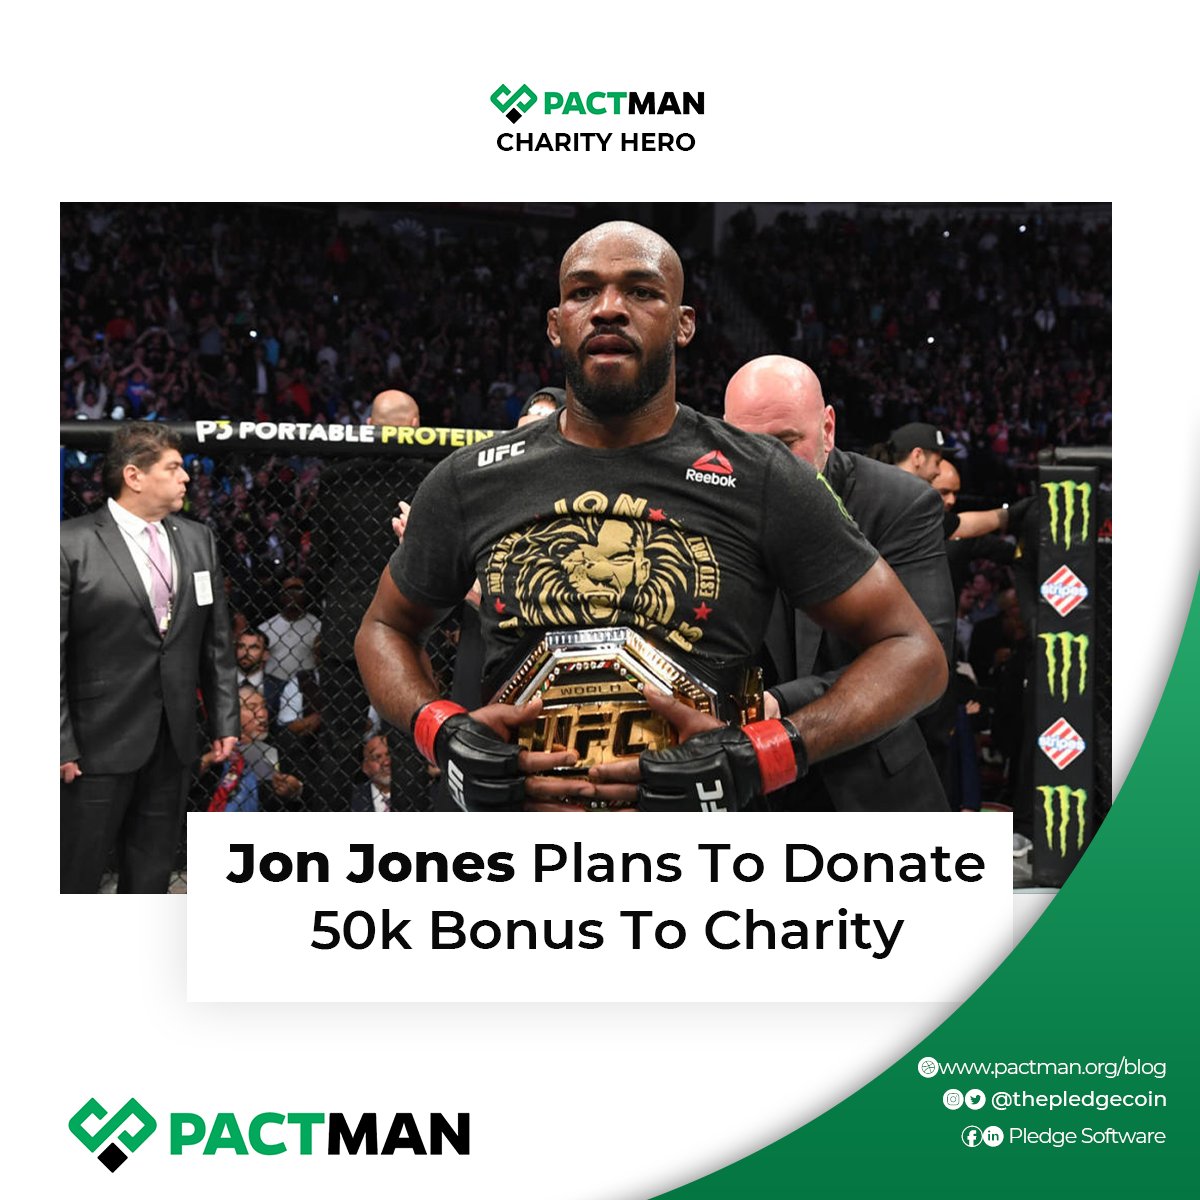 American mixed martial artist, @JonJonesThrows plans to donate his $50k bonus to charity. 
We are supporting donors and charity organisations by providing a transparent platform that connects both parties through PACTMAN.
#charitycause #charitynews #pactman #givingback #pactman